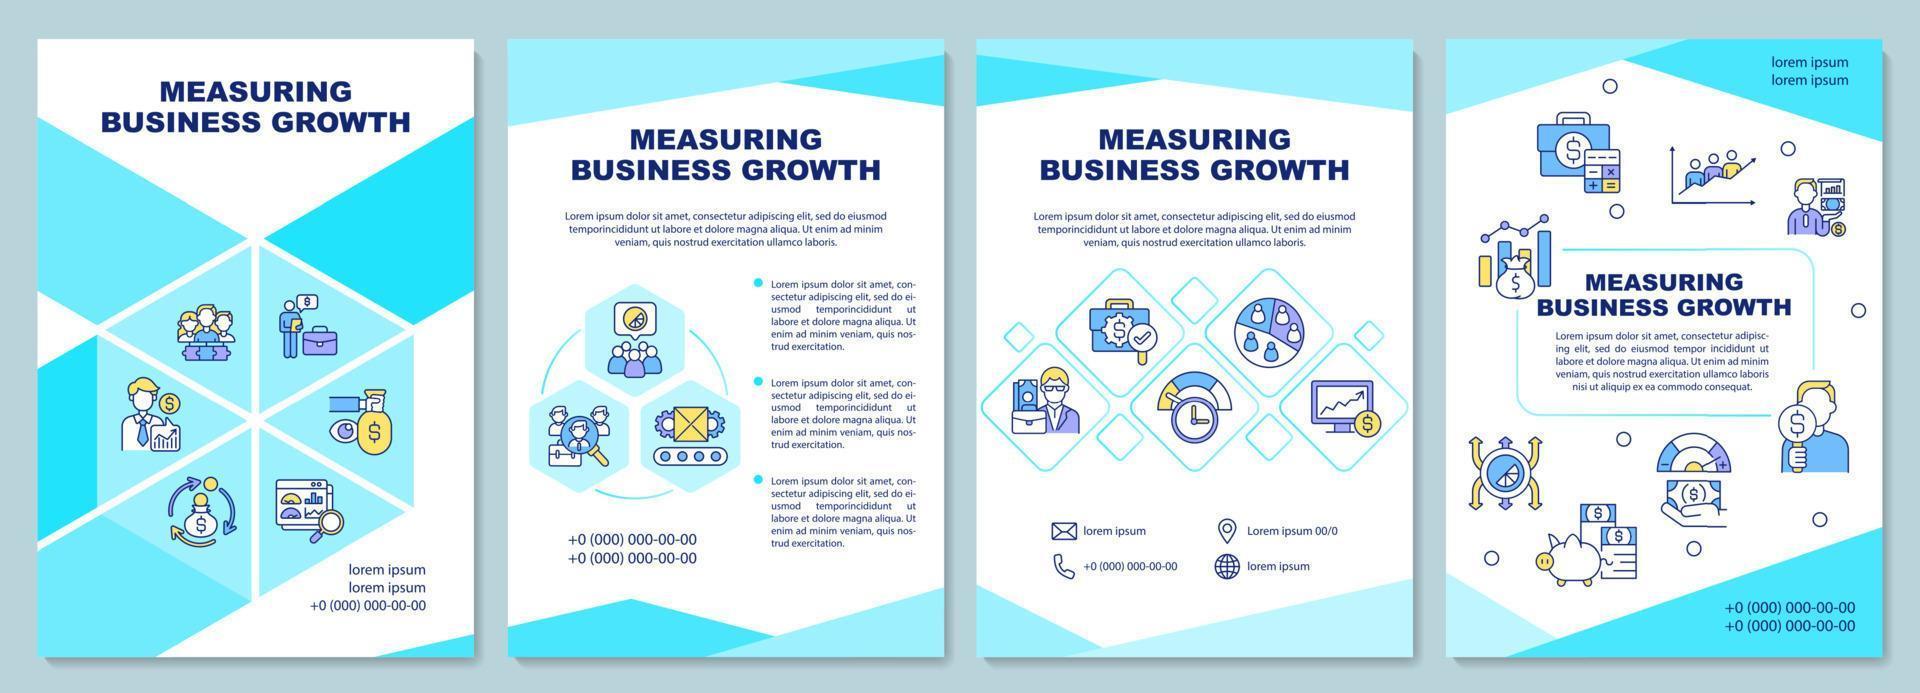 Measuring business growth brochure template. Company development. Flyer, booklet, leaflet print, cover design with linear icons. Vector layouts for presentation, annual reports, advertisement pages